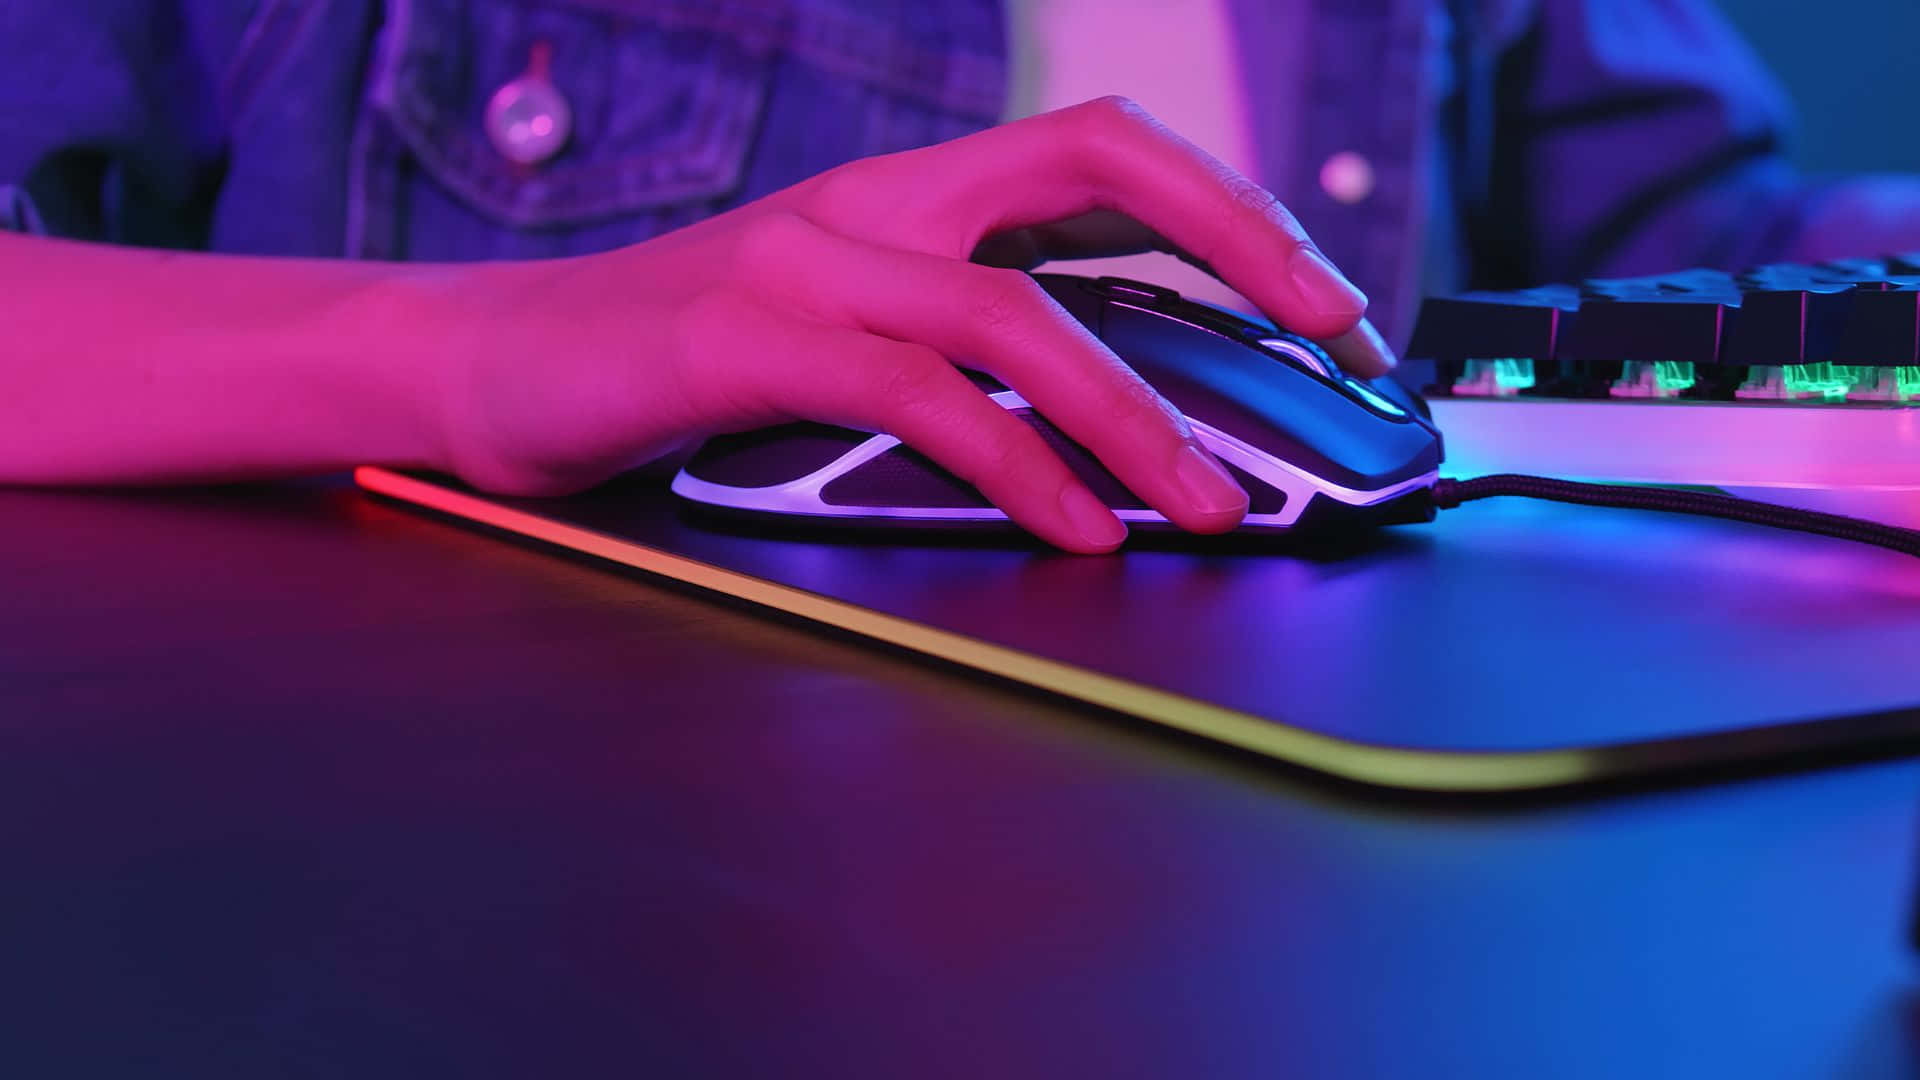 Your game is the competition, level up with the perfect gaming mouse. Wallpaper